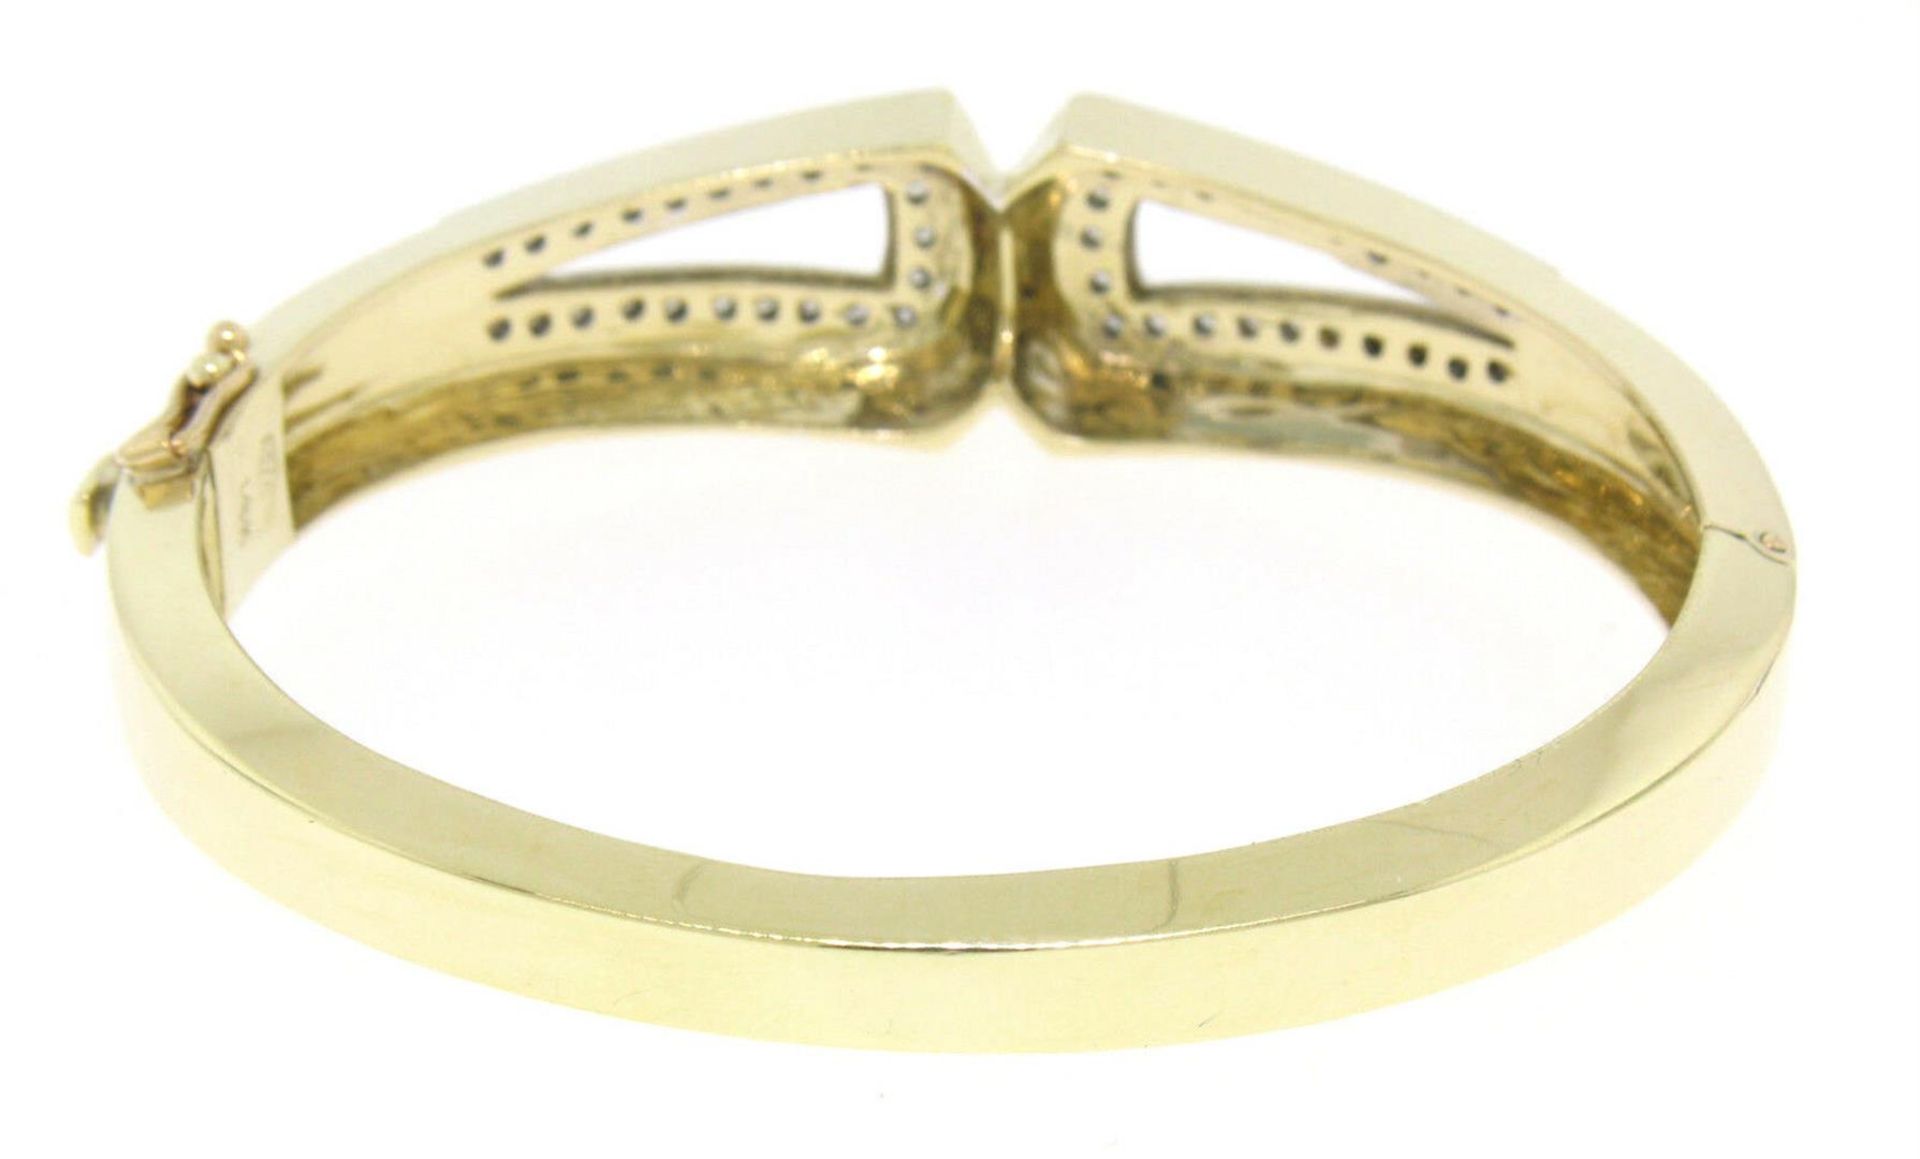 Estate 14K Solid Two Tone Gold Hinged Open Bangle Bracelet with Pave Diamonds - Image 4 of 8